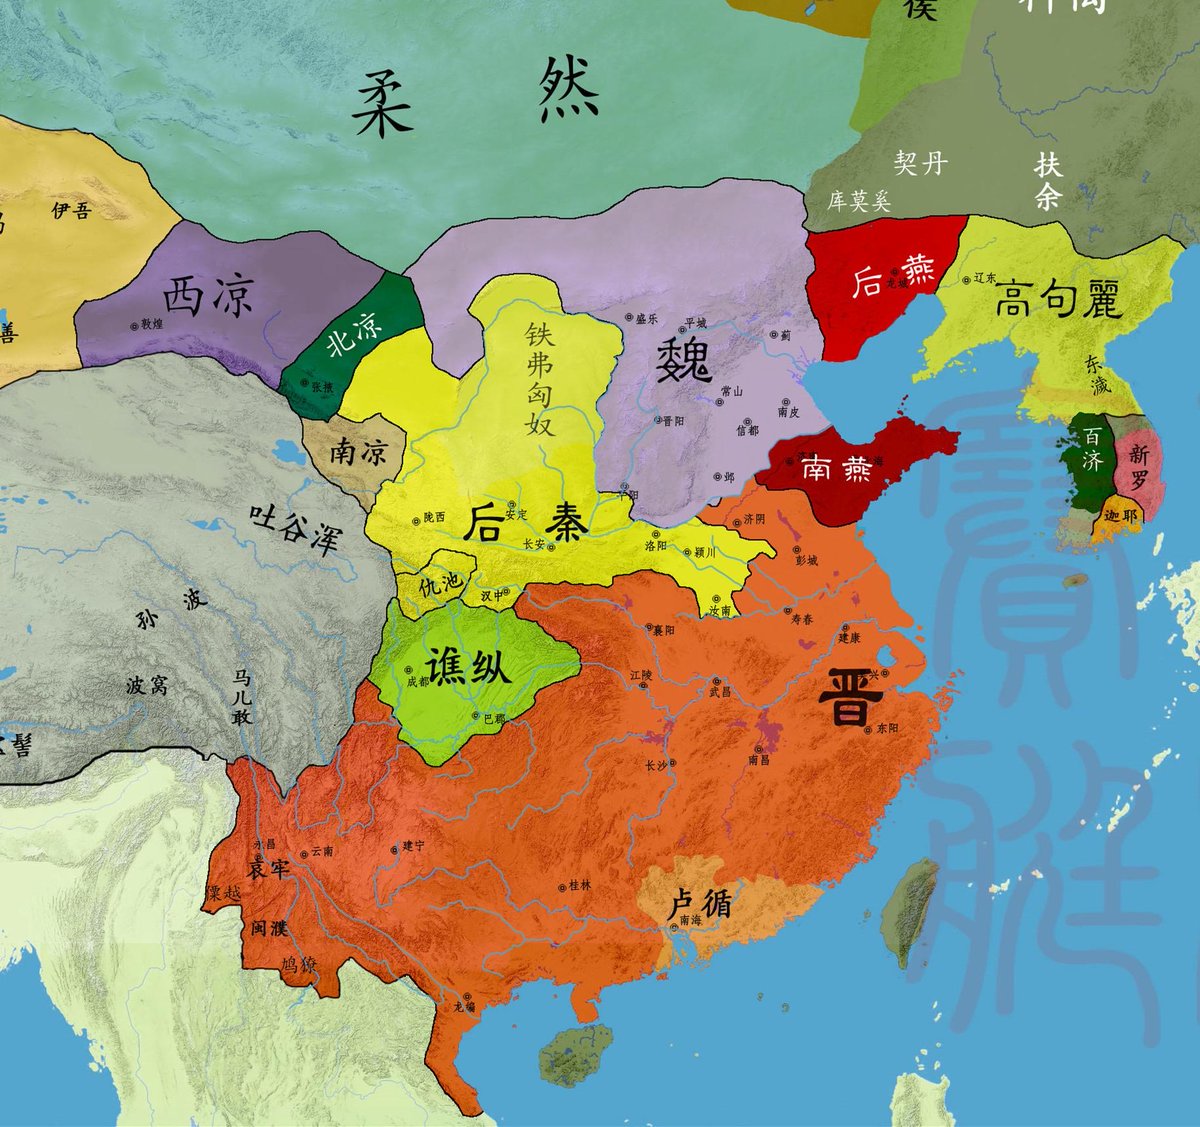 Li Bai himself asserted his descent from Royal Li Clan of Xi Liang (400-421AD purple below ) in his own writings: 本家隴西人，先爲漢邊將 and 白本家金陵，世為右姓。遭沮渠蒙遜之難，奔流鹹秦，因官寓家。少長江漢If we take this claim at face value, then Li Bai related to Tang rulers